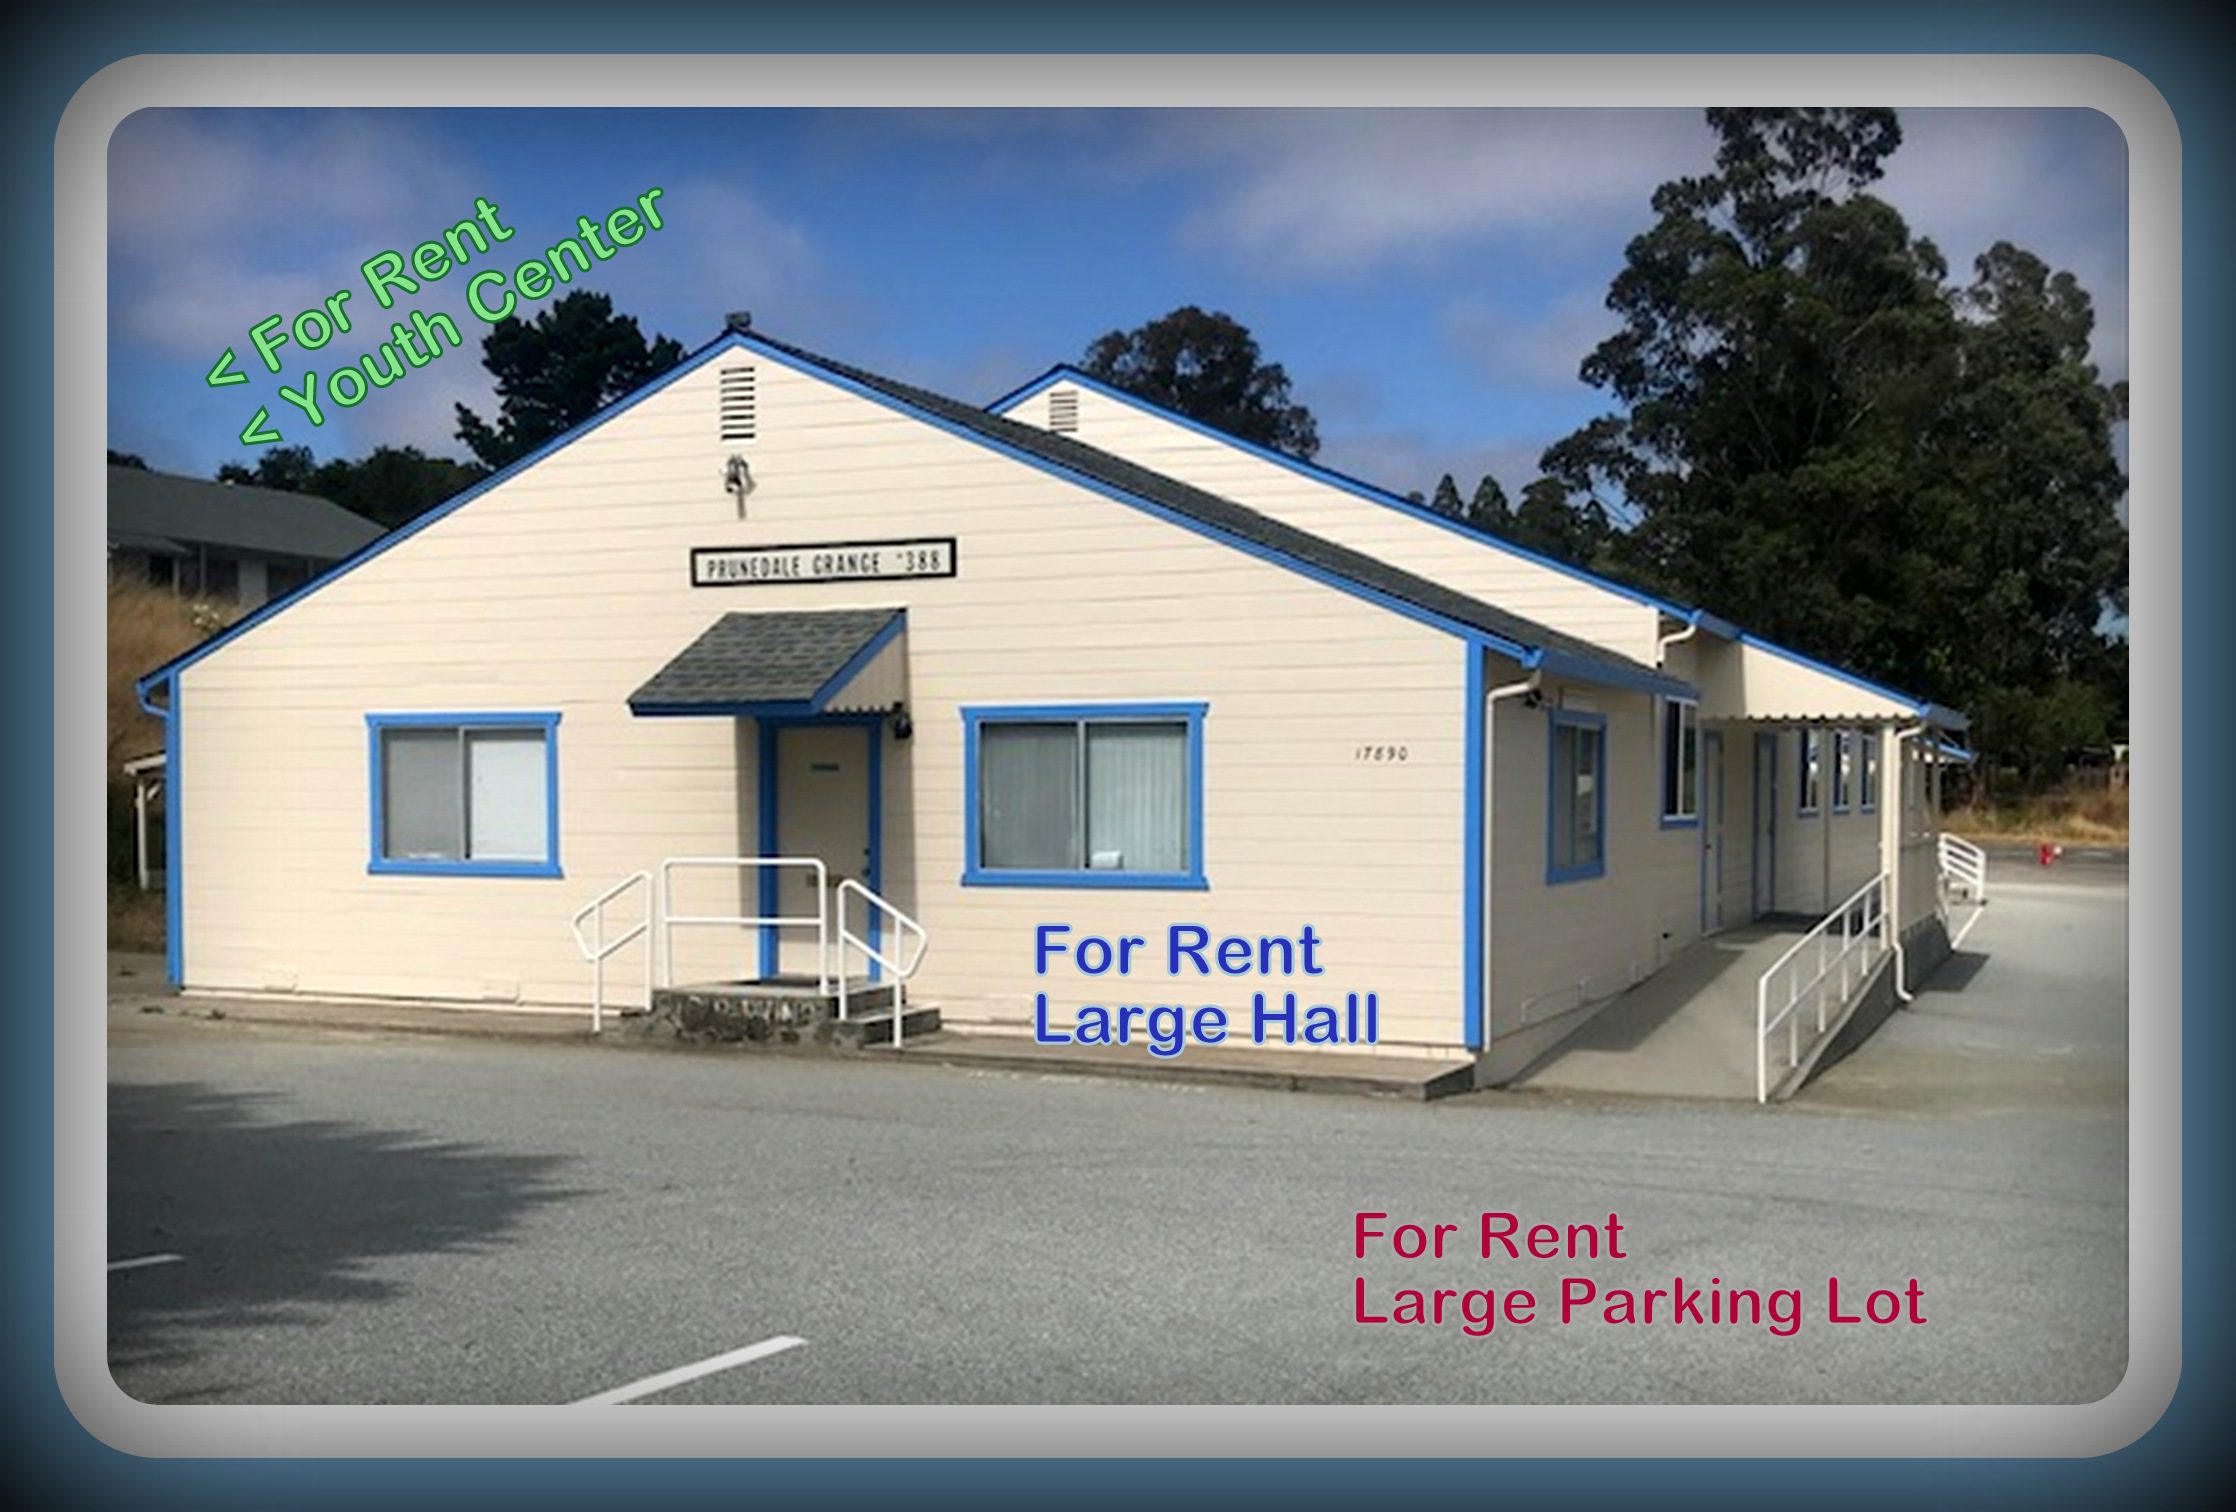 Rent our Youth Center or Large Hall or Parking Lot or all 3